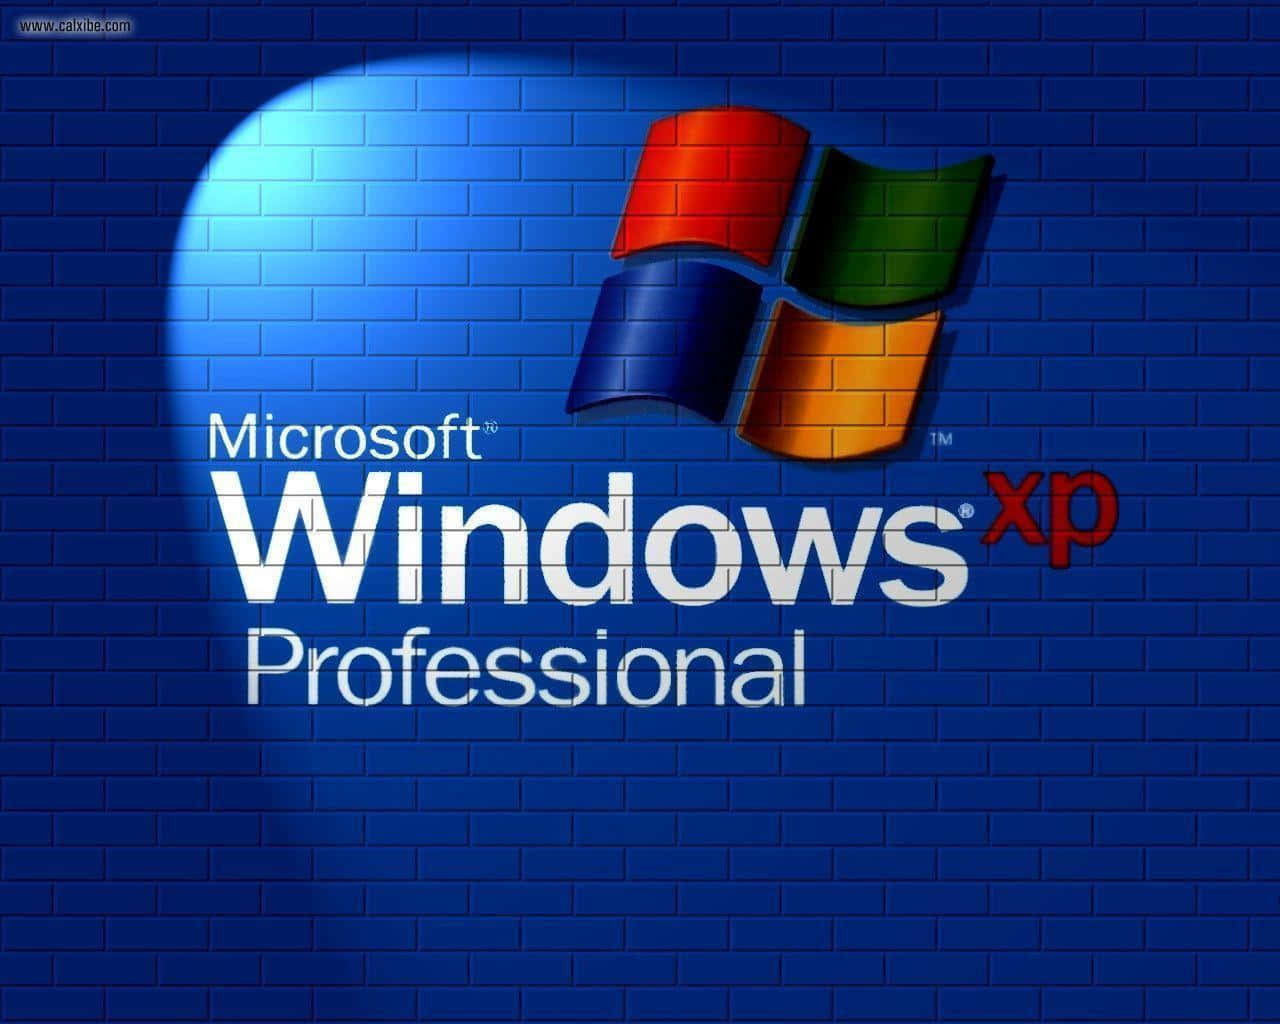 Experience the power of Windows XP